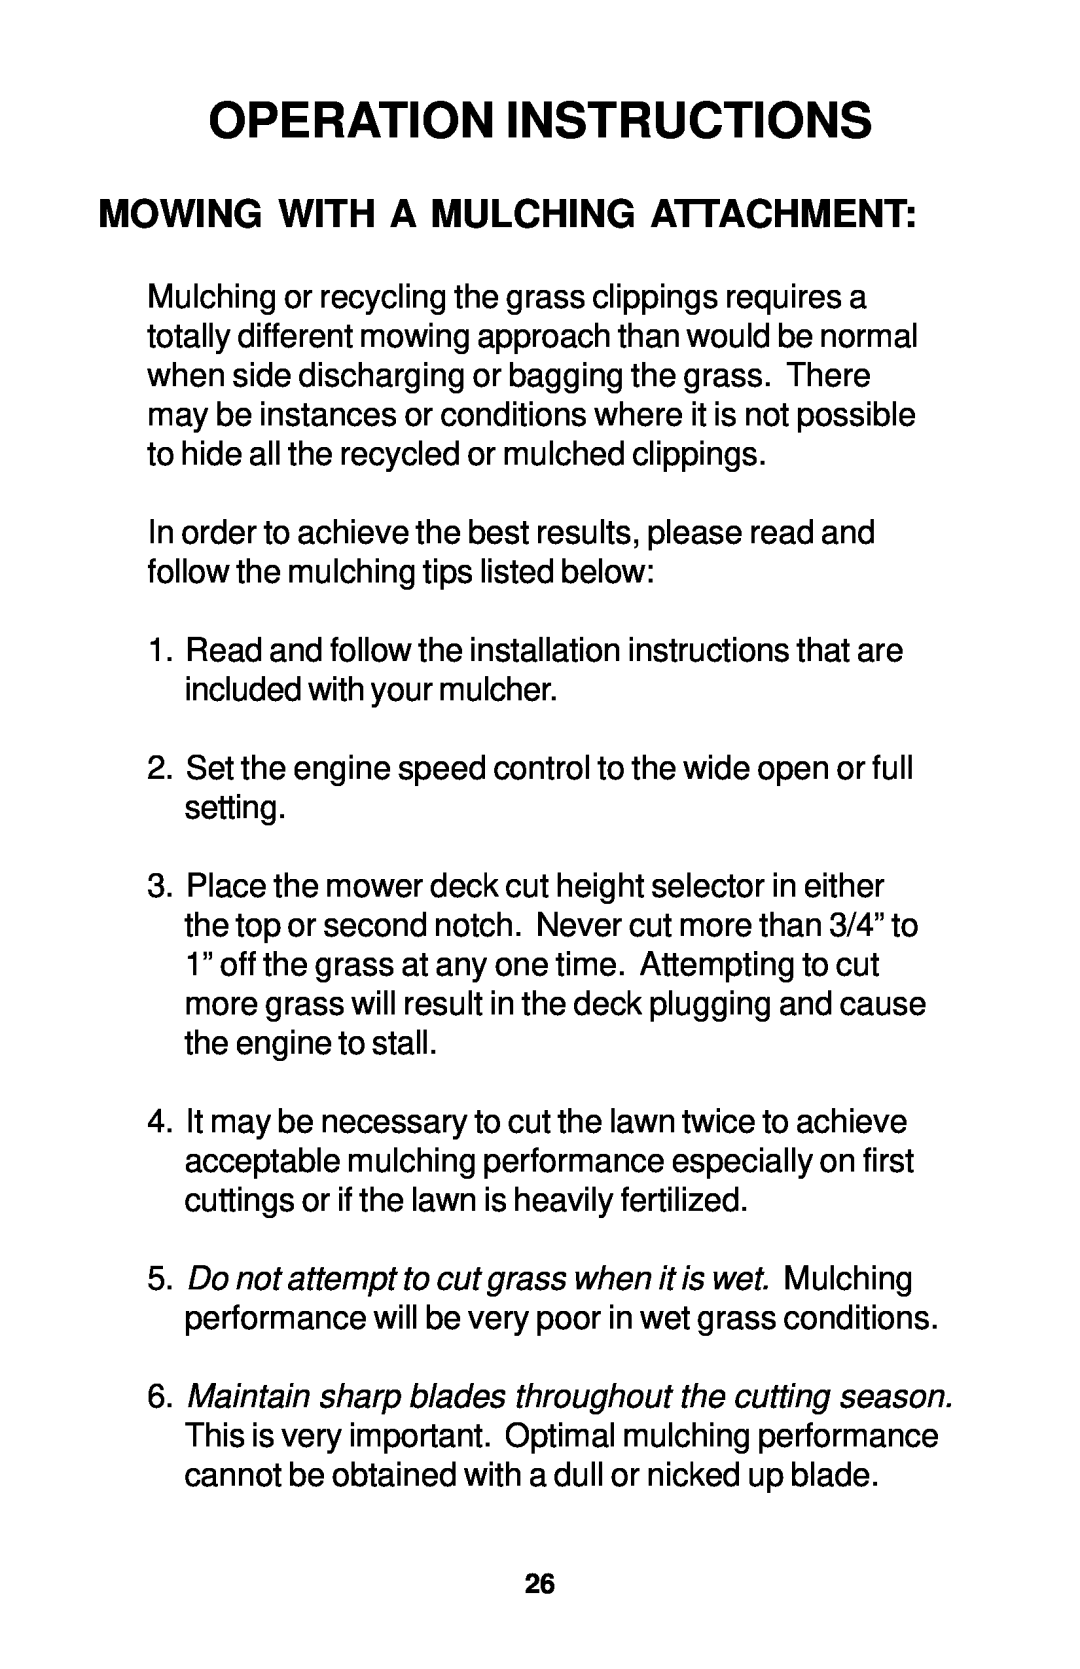 Dixon 18134-1004 manual Mowing With A Mulching Attachment, Operation Instructions 